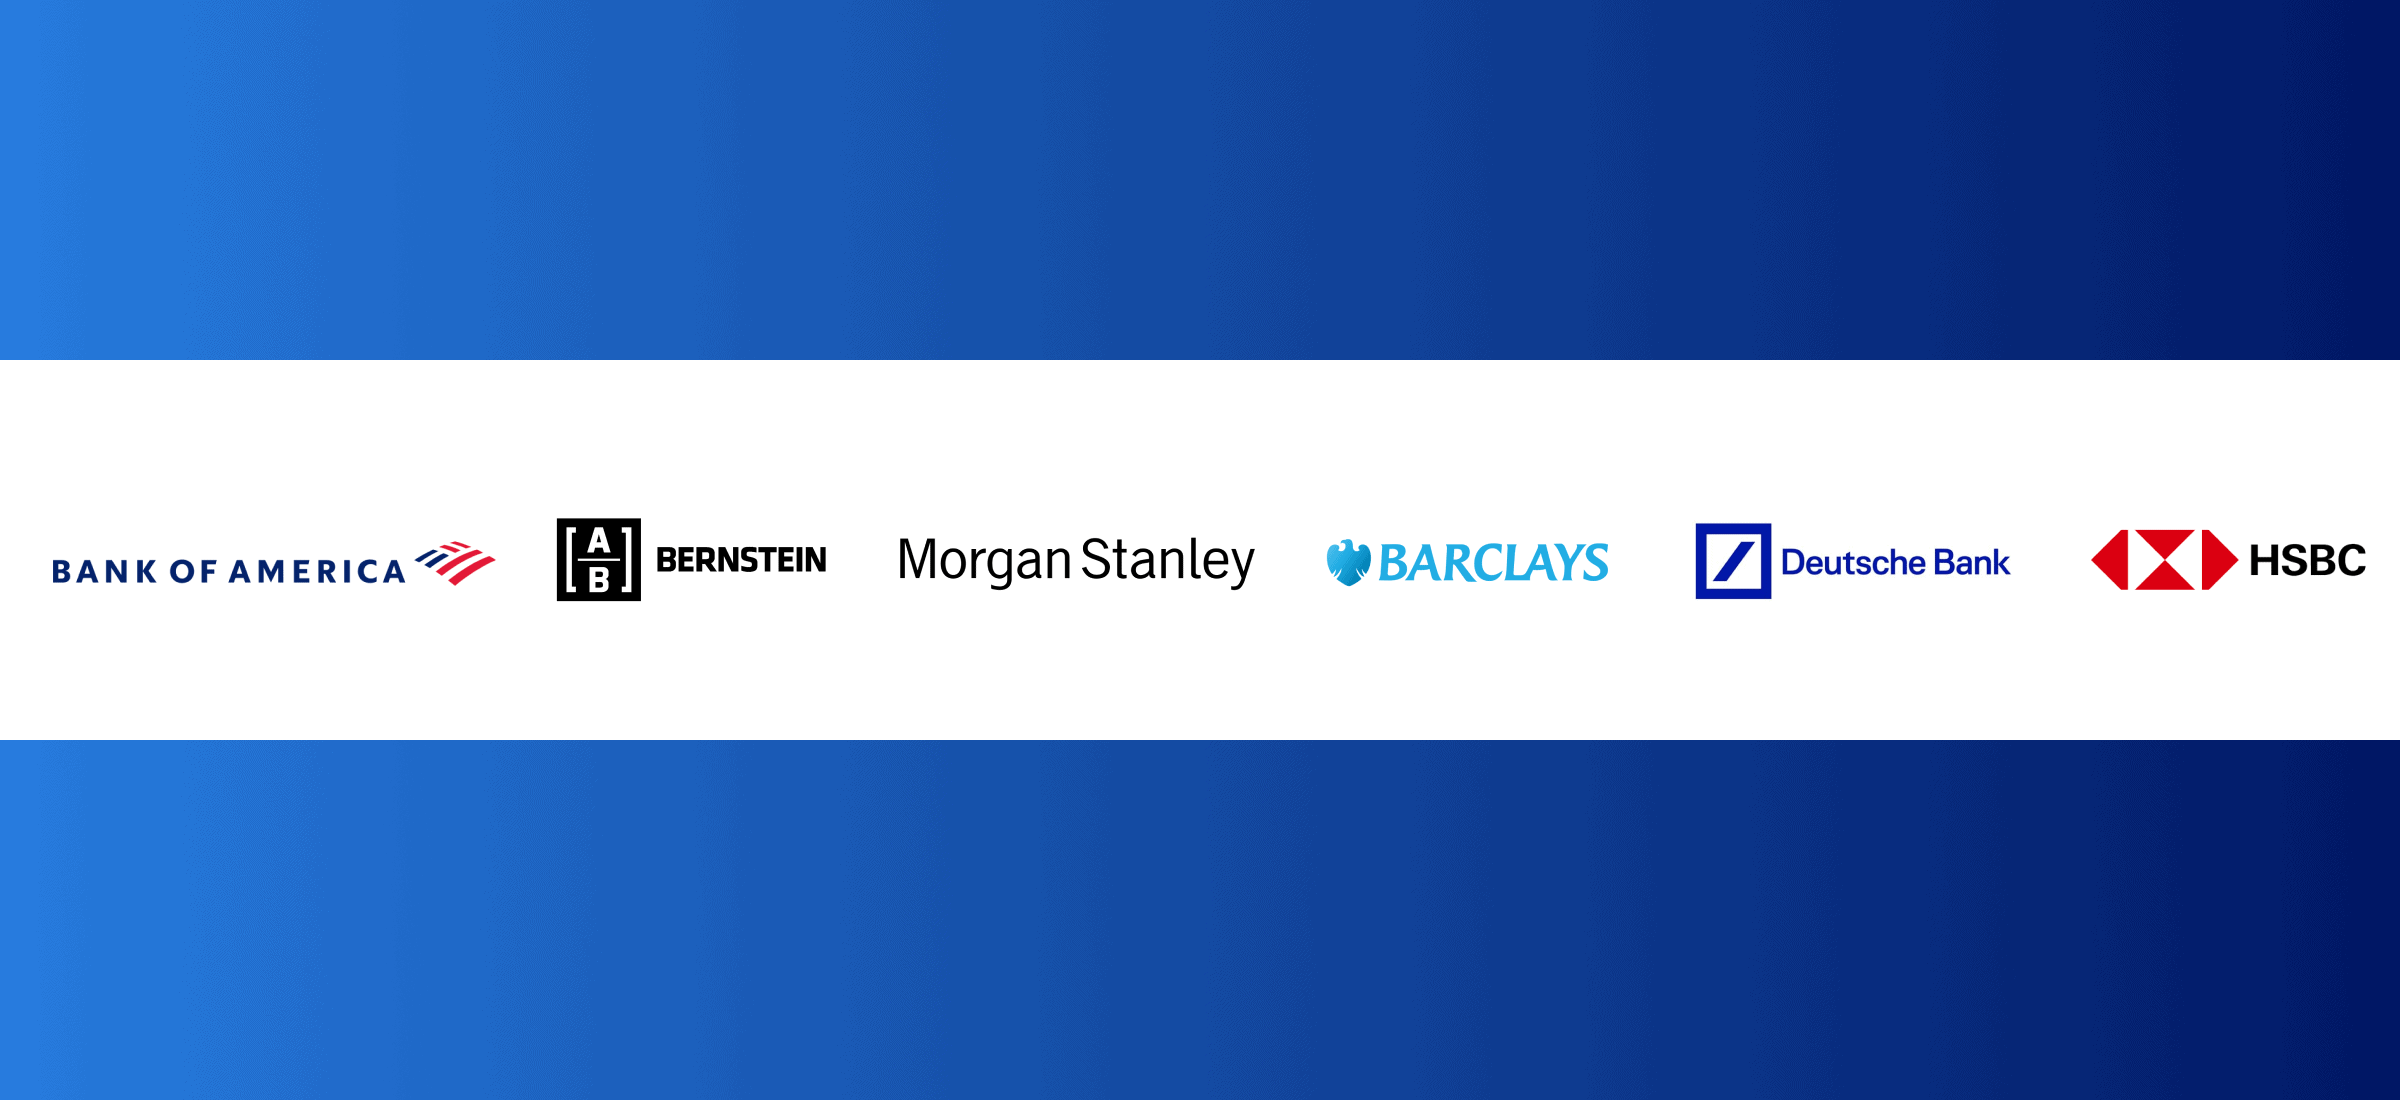 Line of logos including Bank of America and Morgan Stanley.